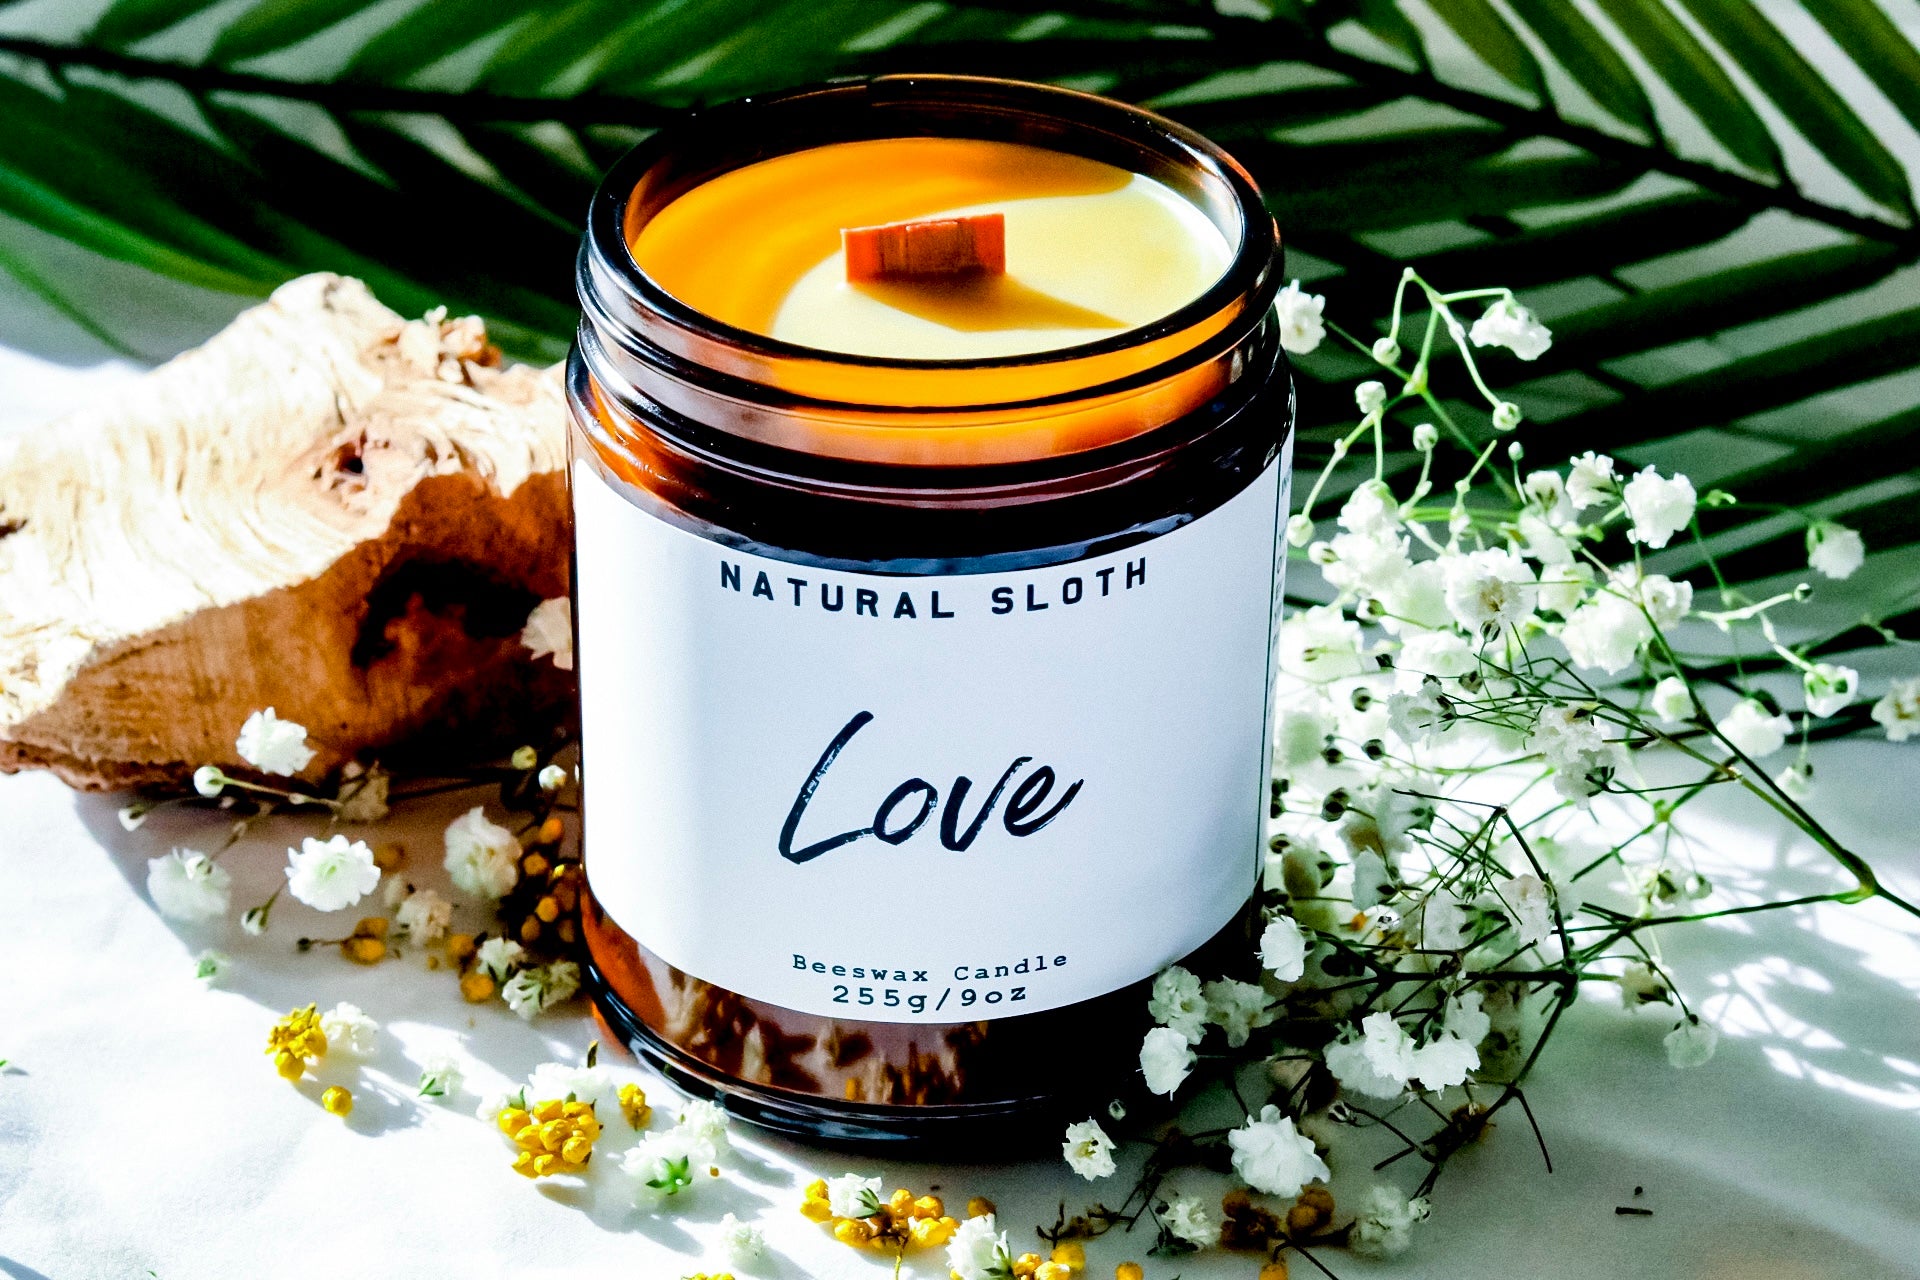 Beeswax Candles Made With Pure Essential Oils – Natural Sloth